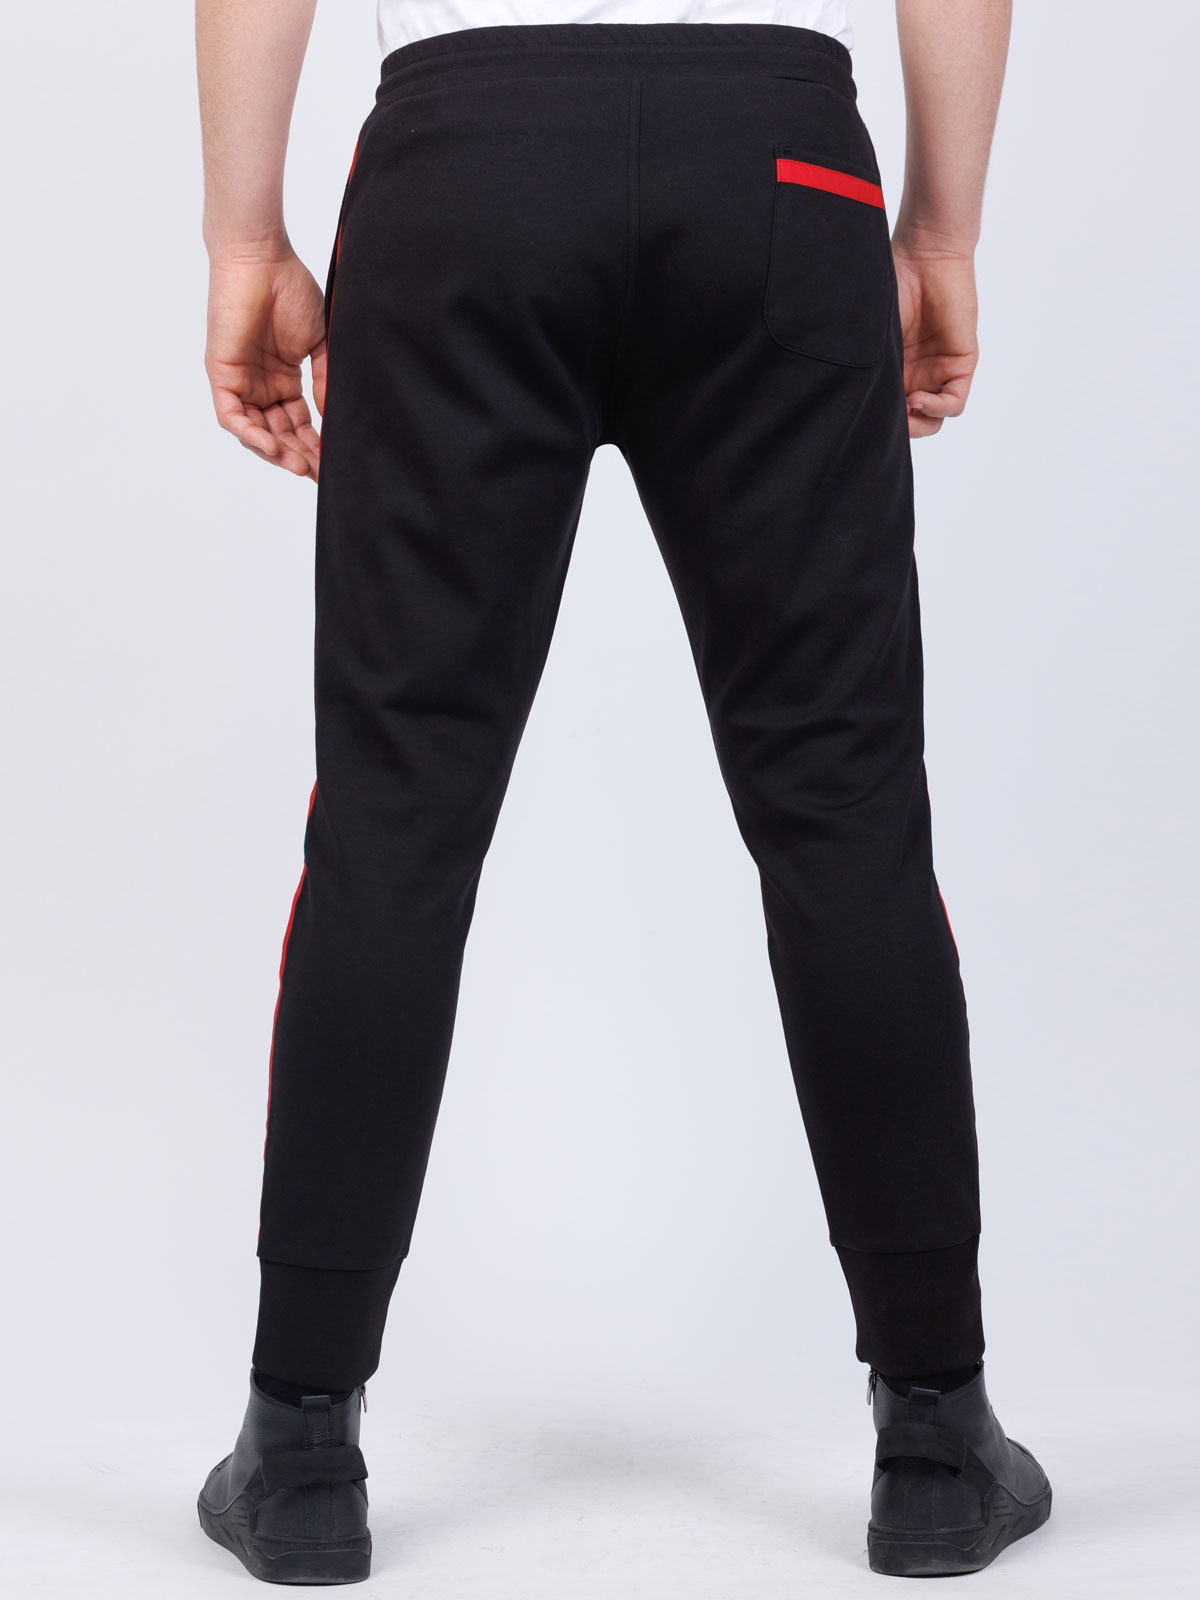 Sports bottom with red stripe - 29002 € 33.18 img3